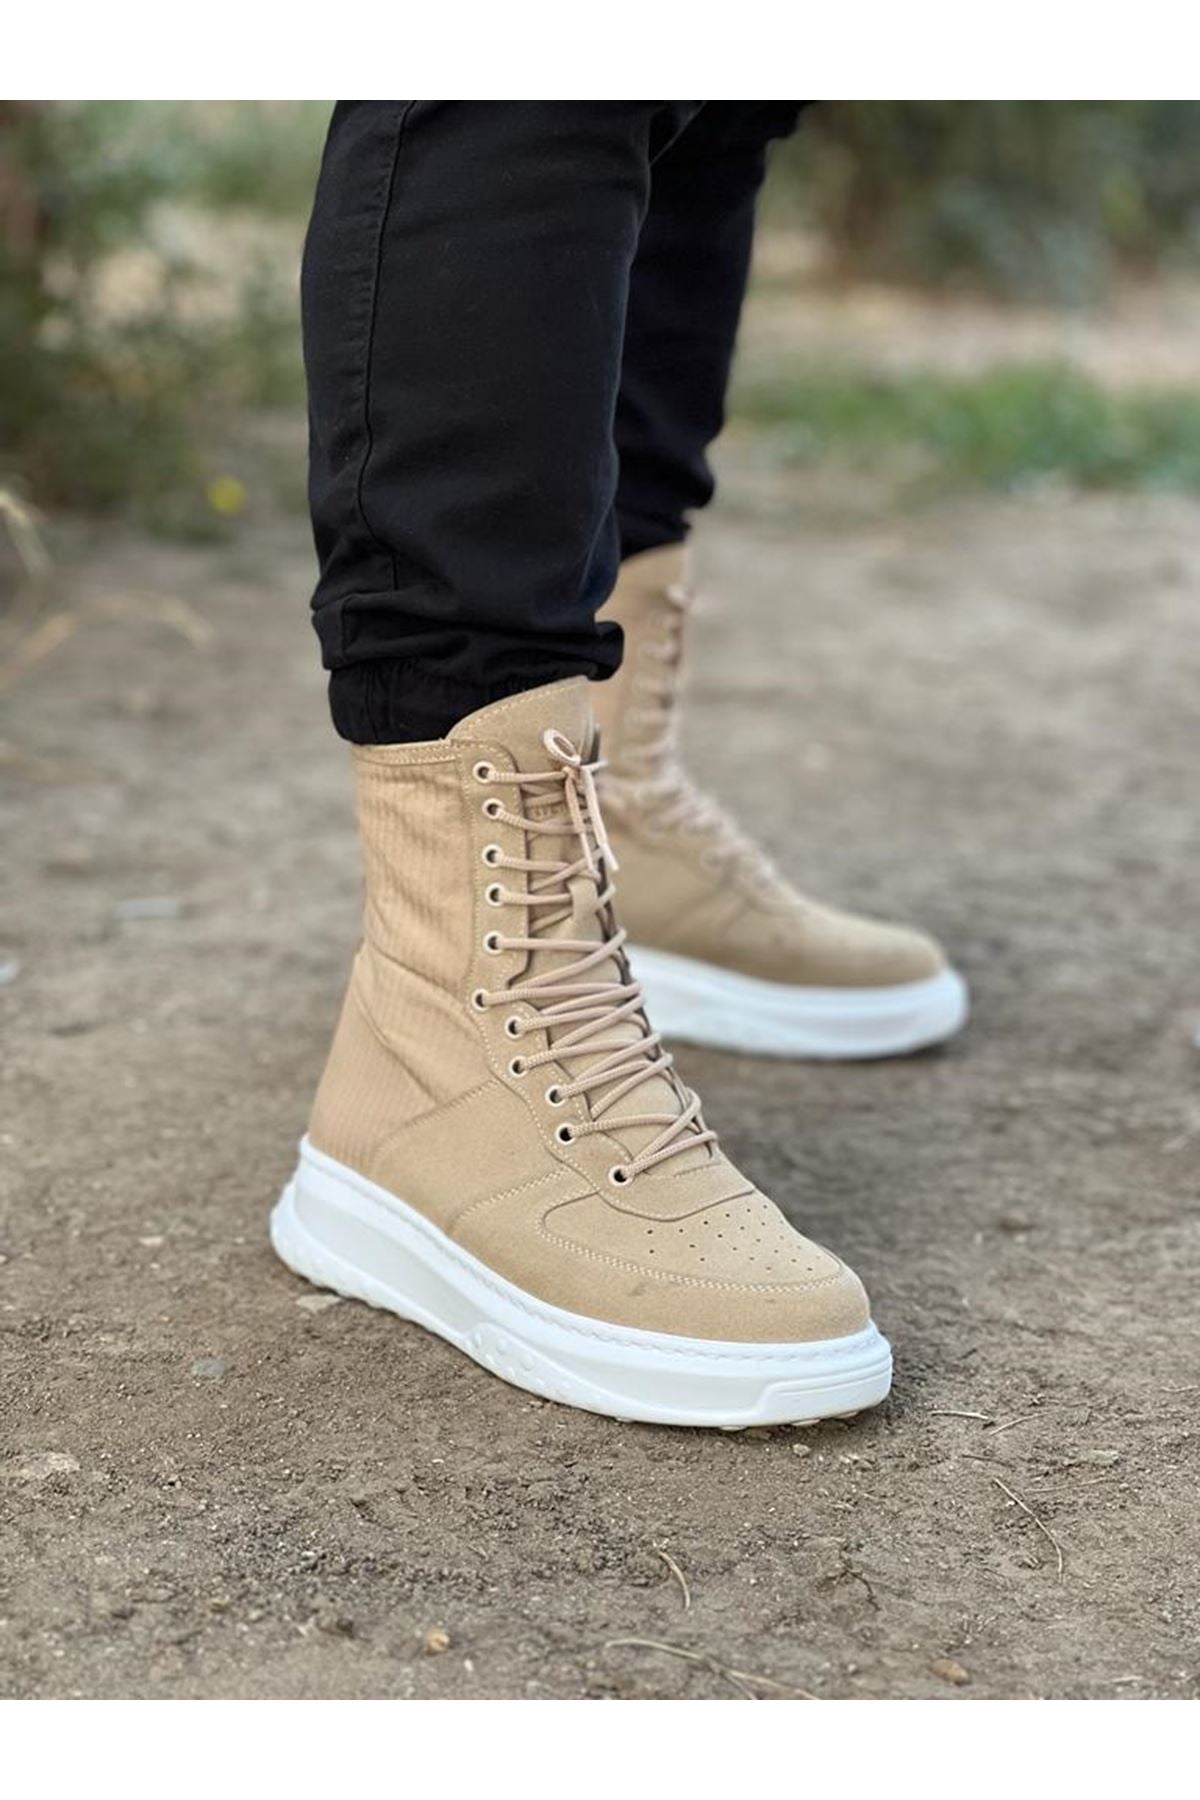 WG012 Men's Beige Suede Leather Long Lace-Up Boots - STREETMODE ™